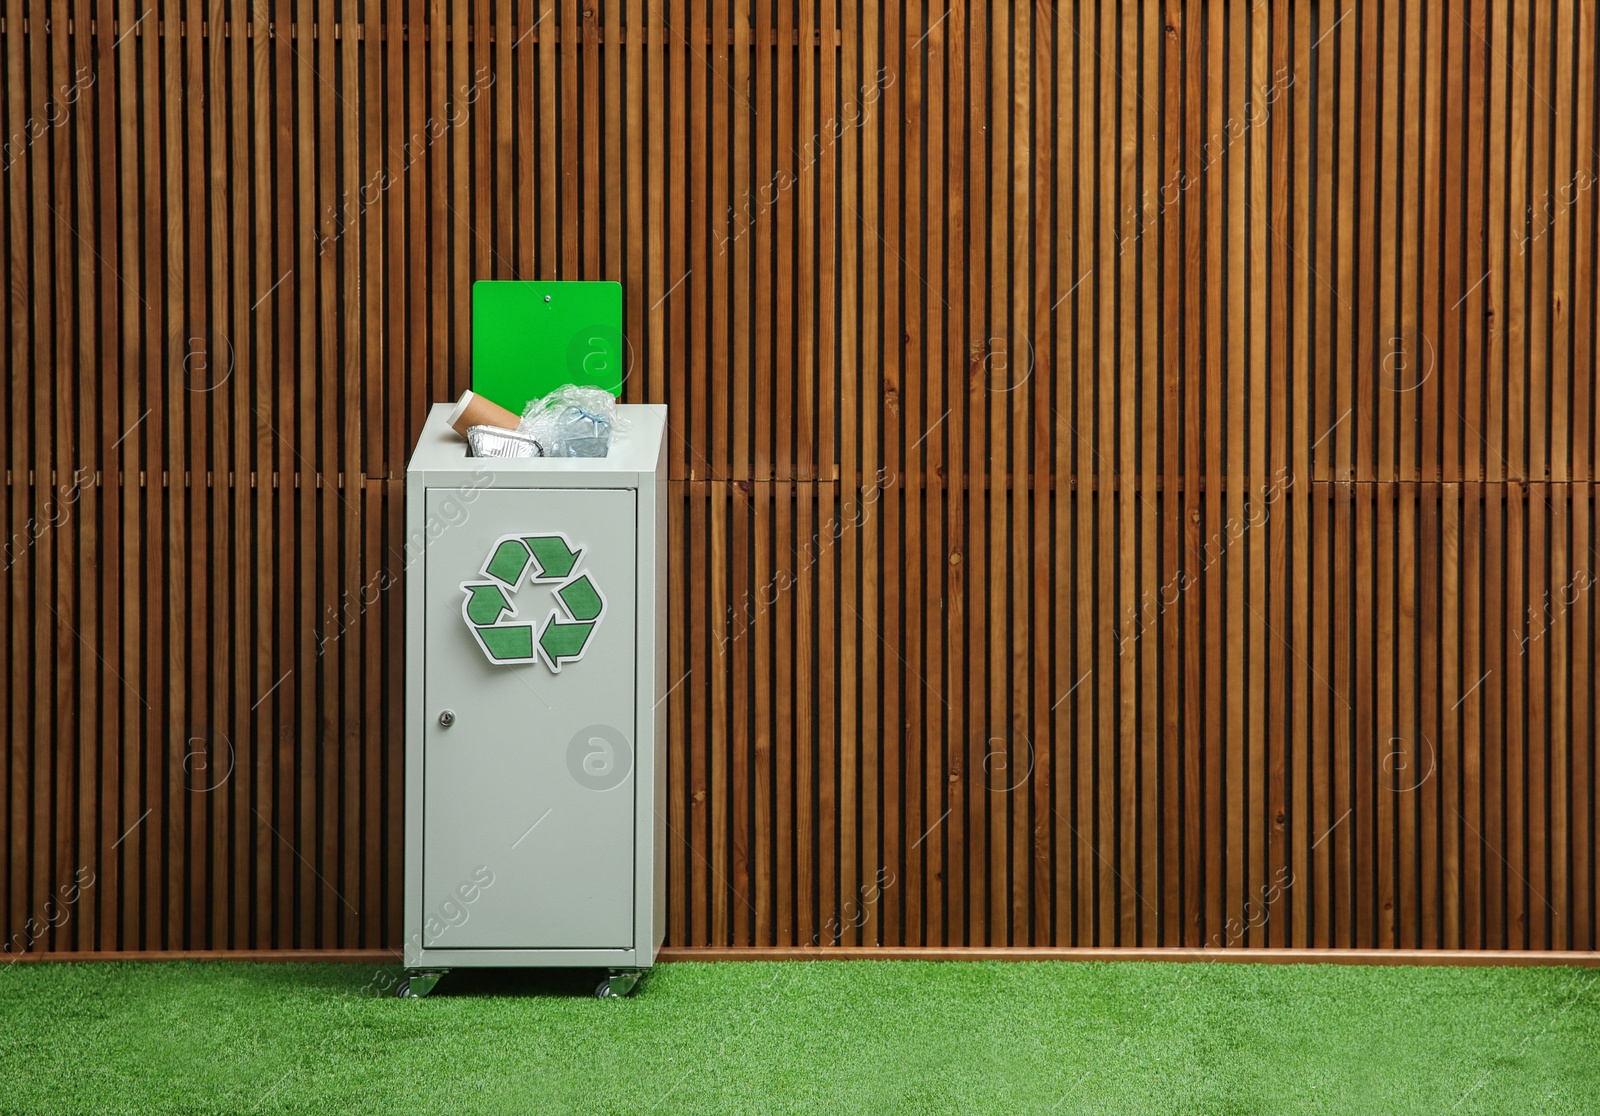 Photo of Overfilled trash bin with recycling symbol near wooden wall indoors. Space for text